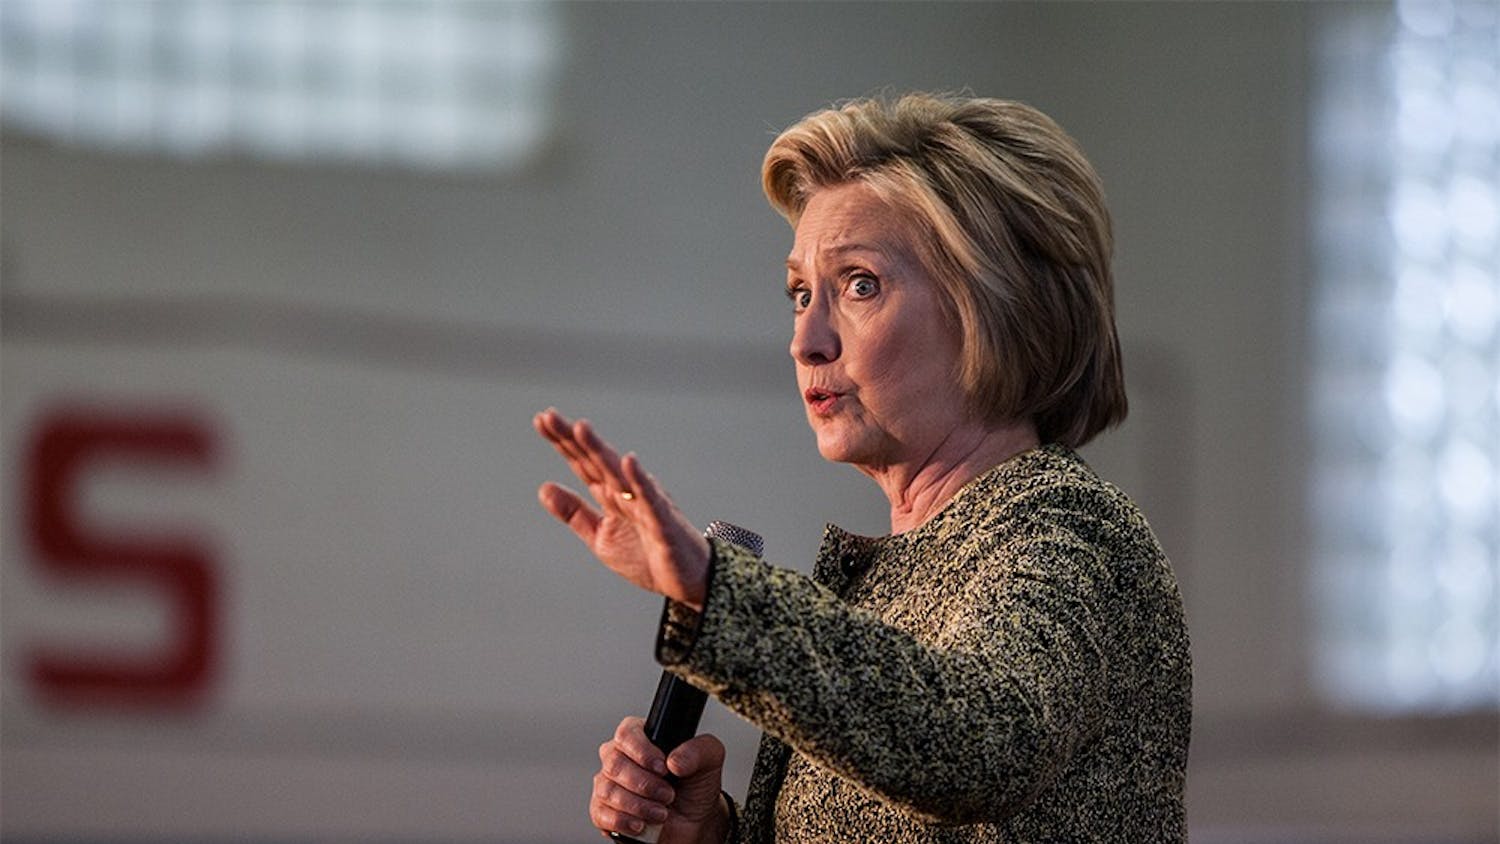 Presidential candidate Hillary Clinton speaks at the Douglass Park Gymnasium in Indianapolis on Sunday ahead of the May 3 Primary Elections in Indiana. Clinton spoke about a slew of topics including healthcare, foreign policy and drug addiction.